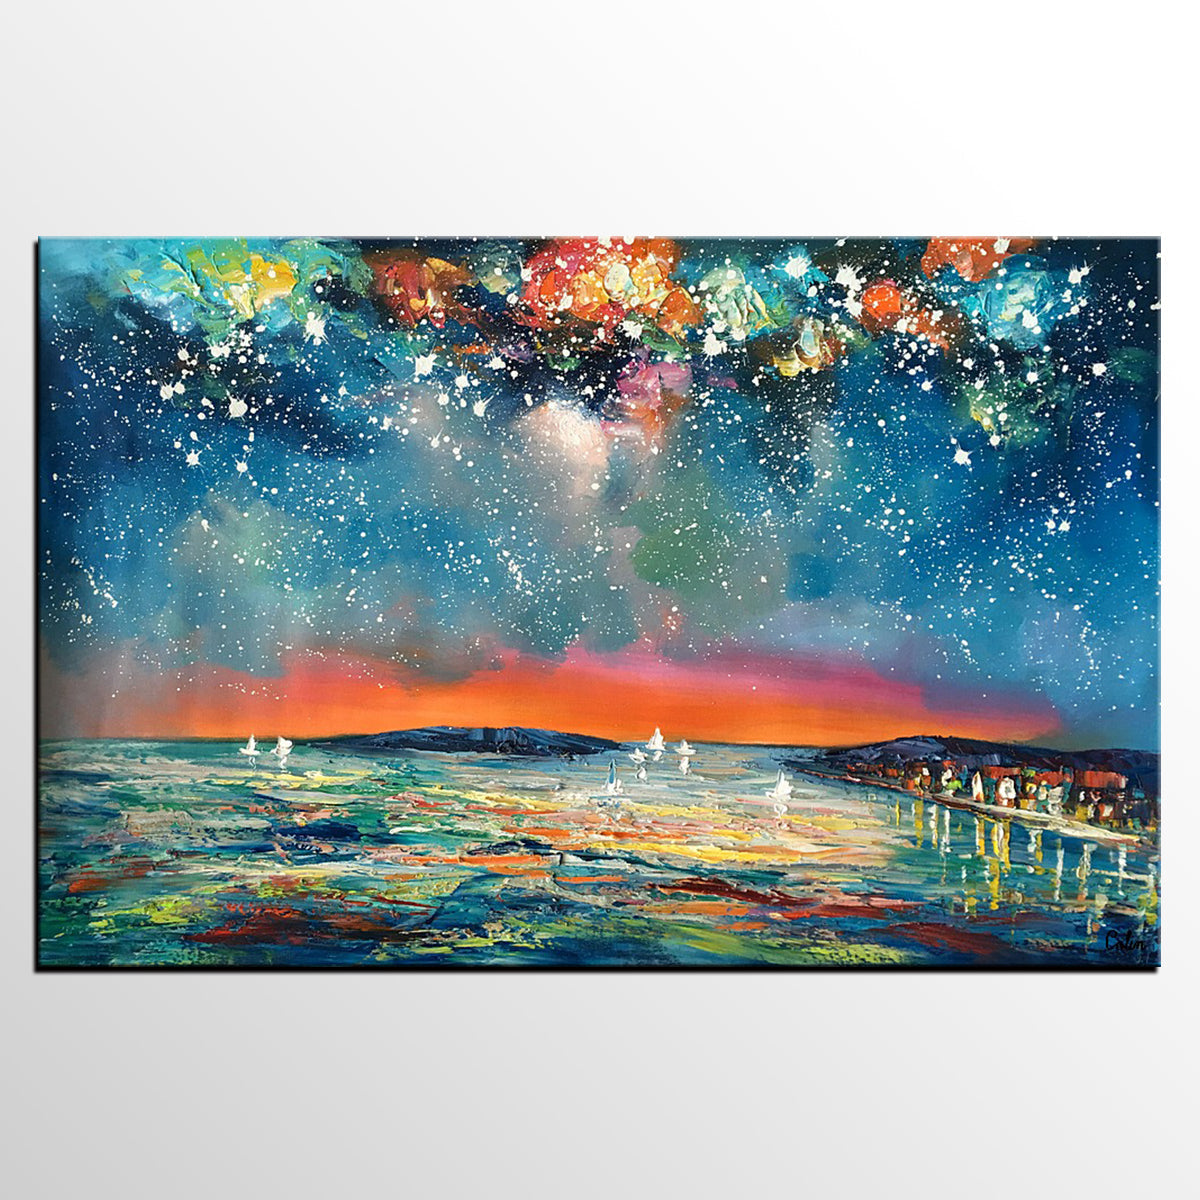 Buy Art Online, Abstract Art for Sale, Sail Boat under Starry Night Sky Painting, Custom Art-Art Painting Canvas